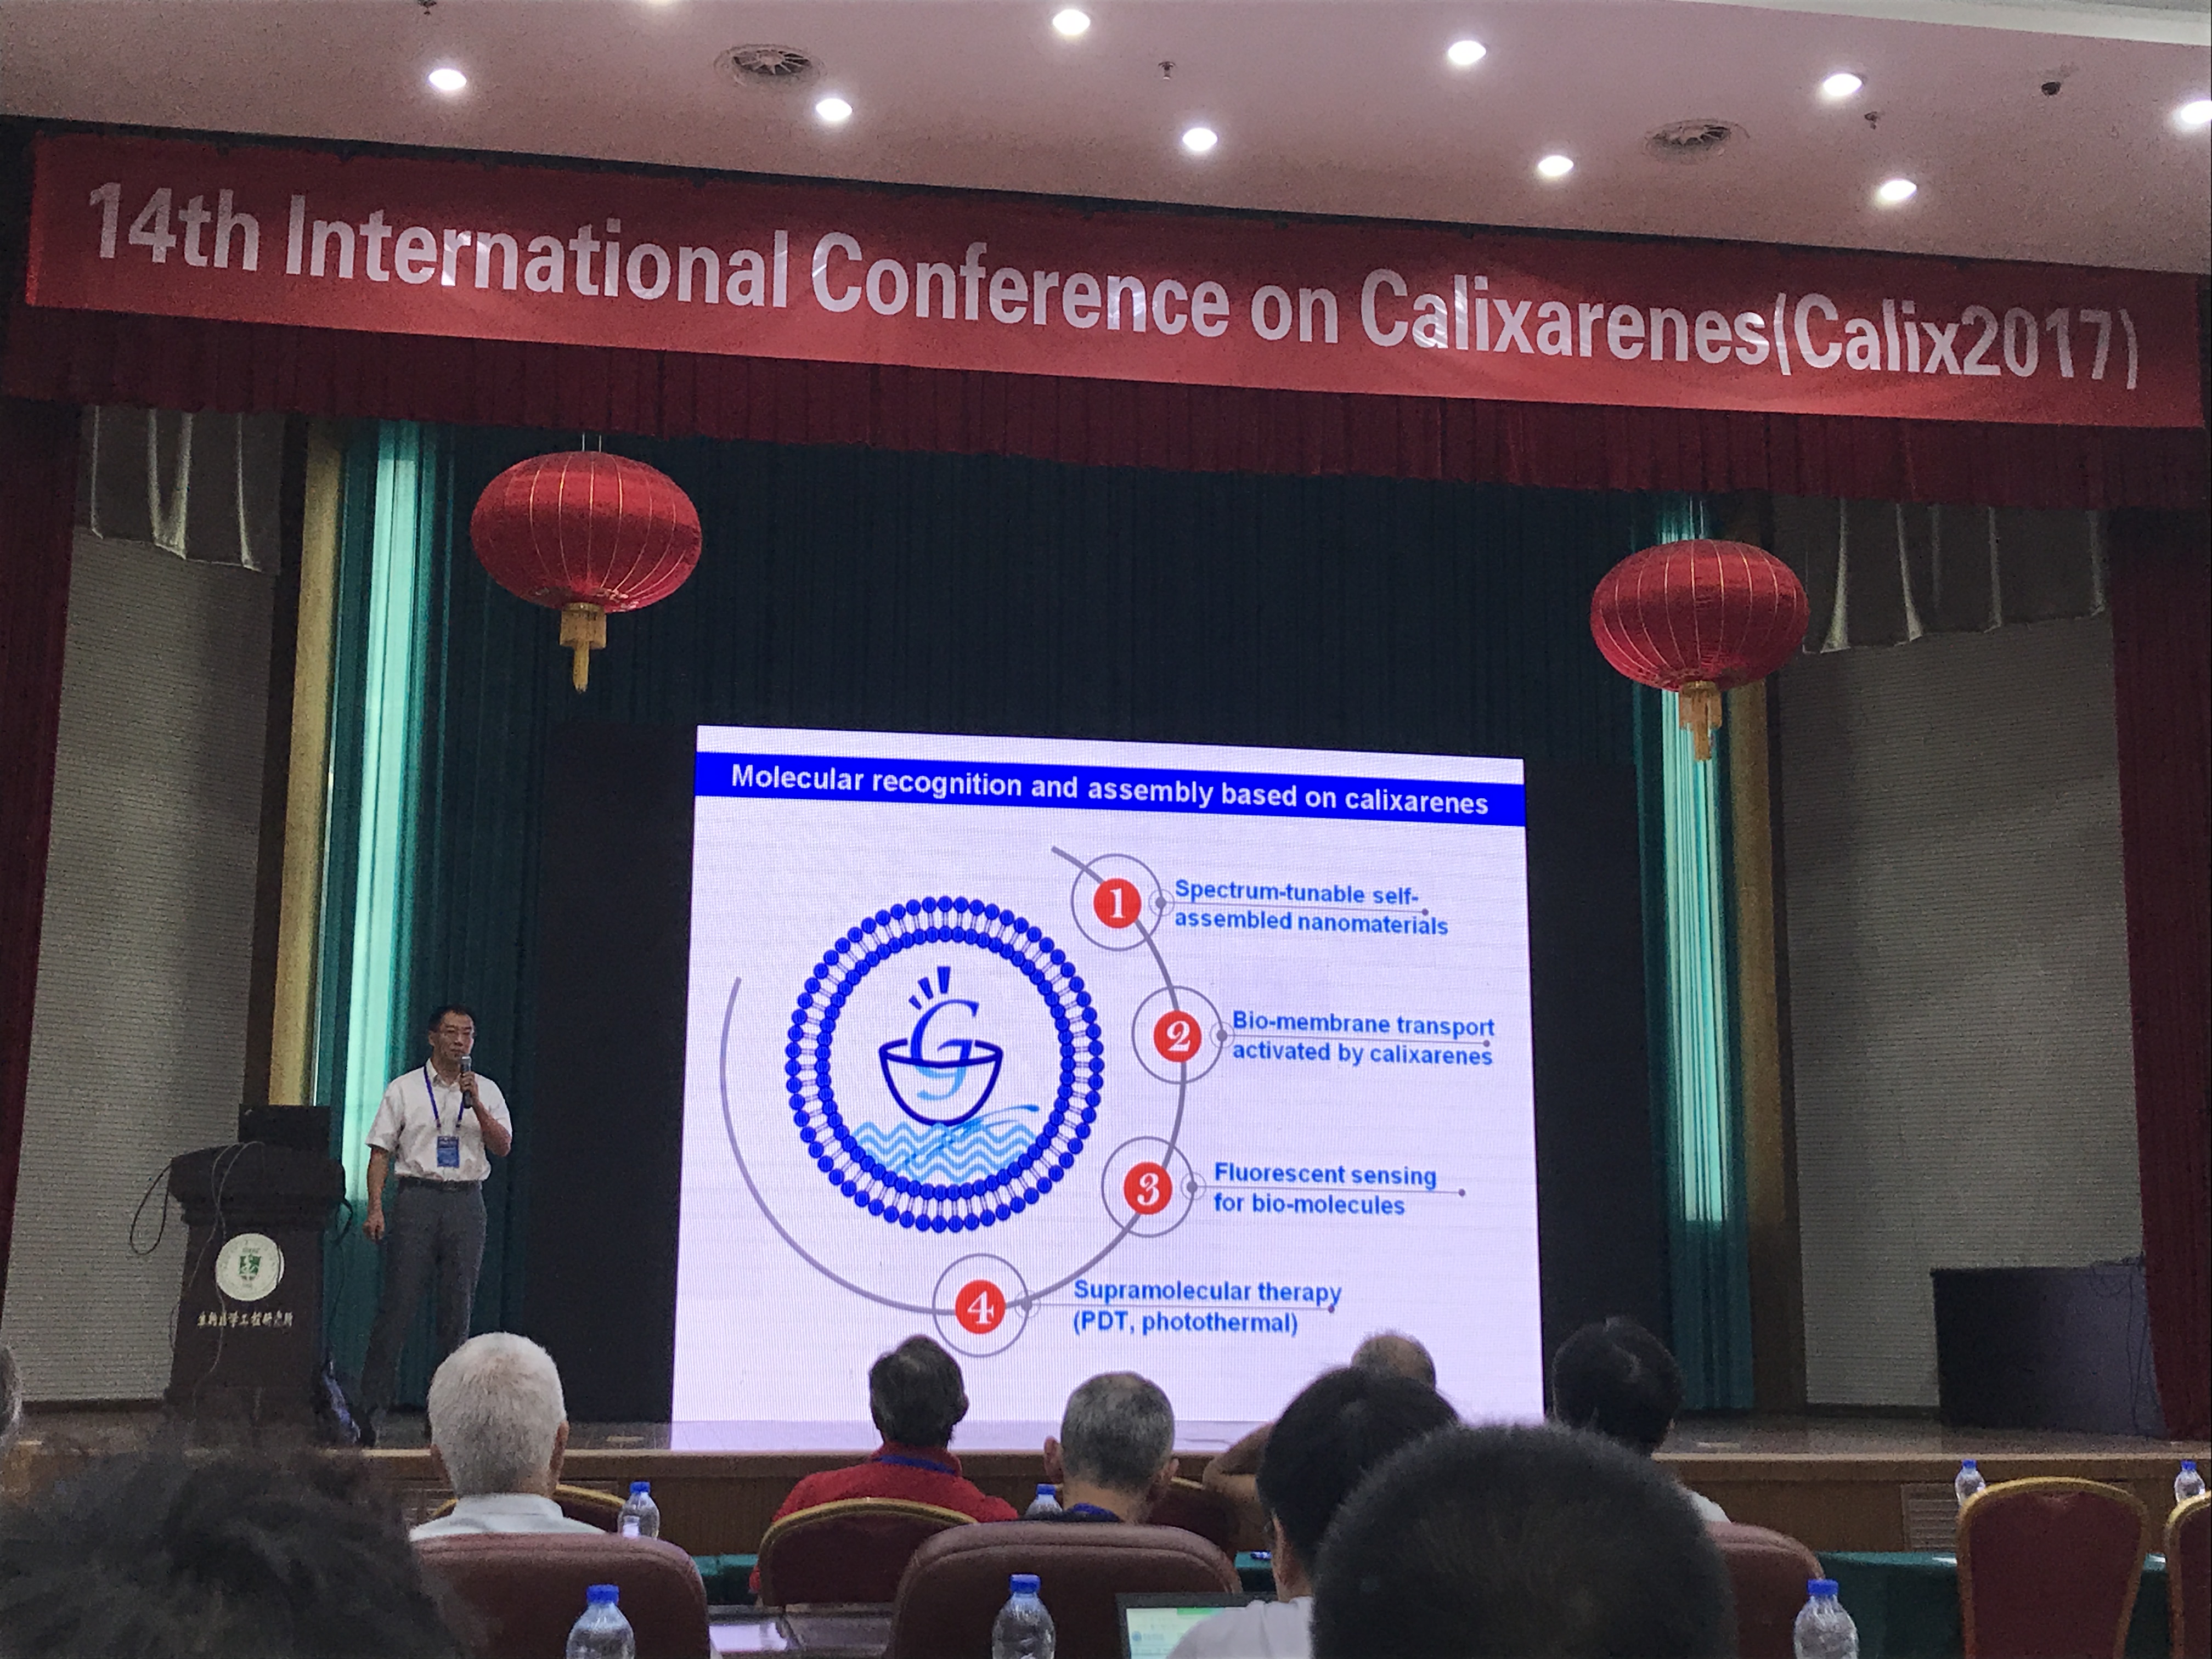 The 14th International Conference on Calixarenes